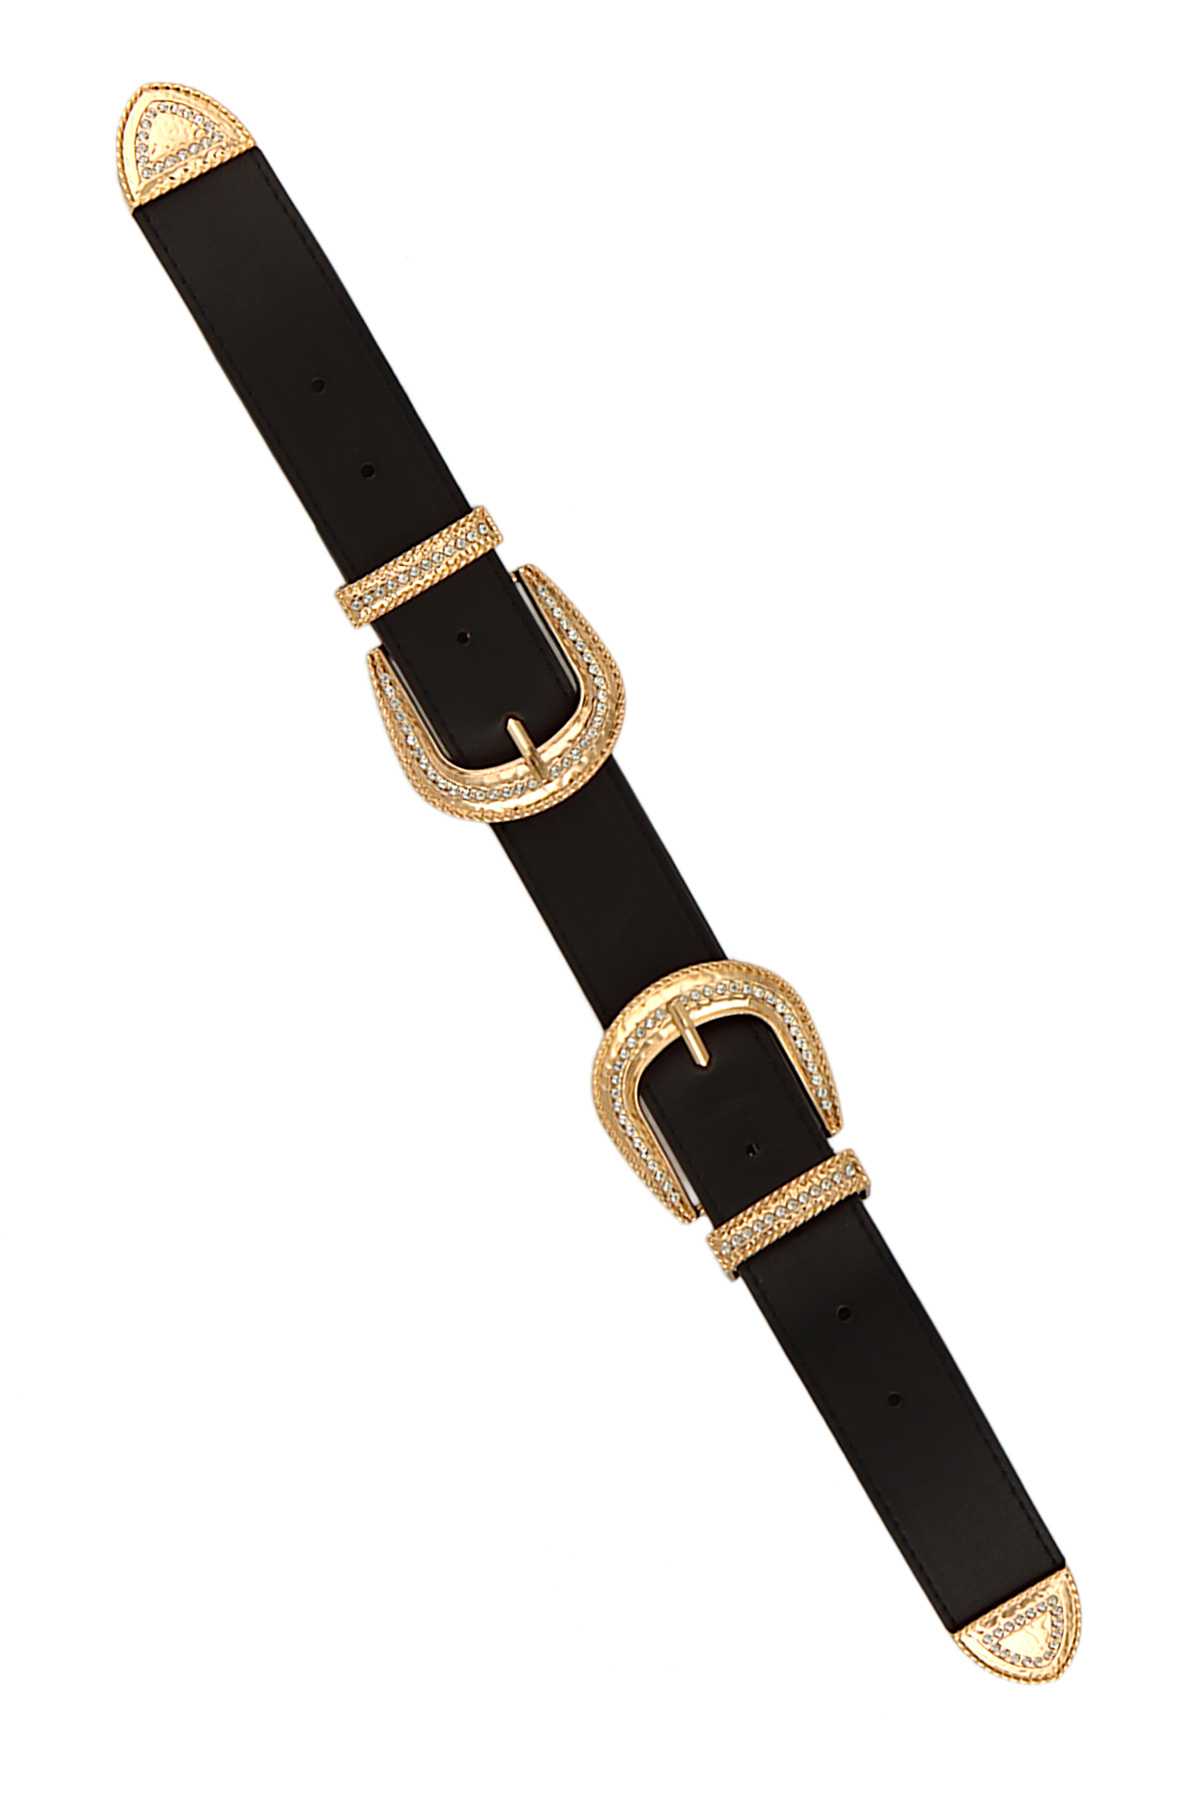 Textured Double Buckle with Rhinestone Belt